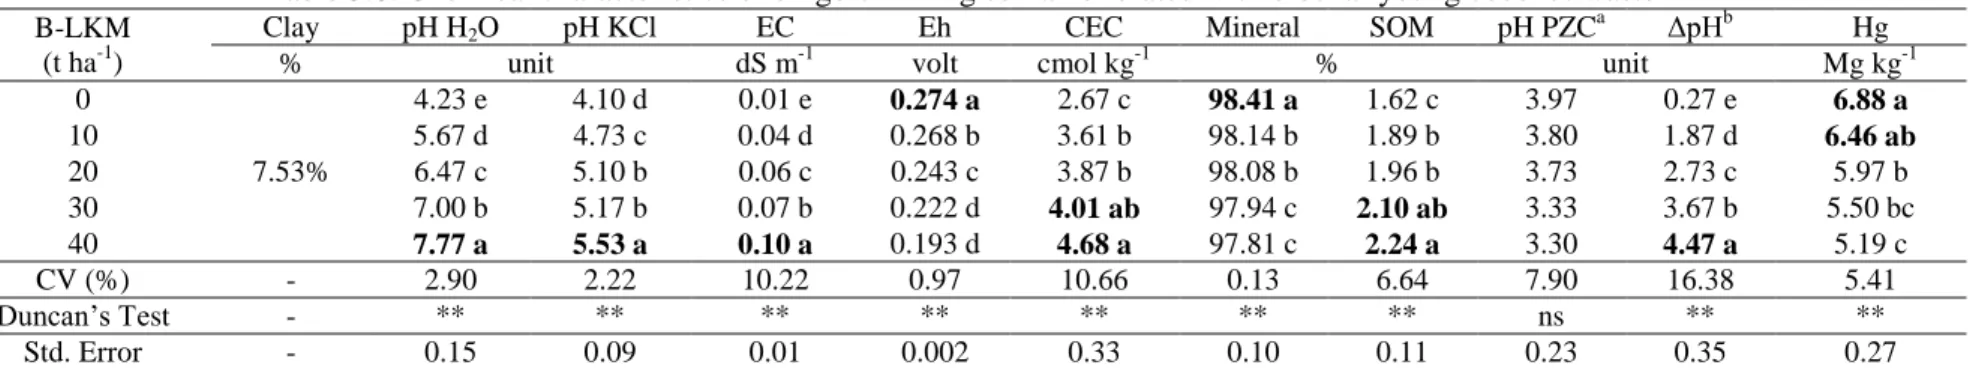 Table 5.8. Chemical characteristics of ex-gold mining soil ameliorated with biochar young coconut waste  B-LKM 